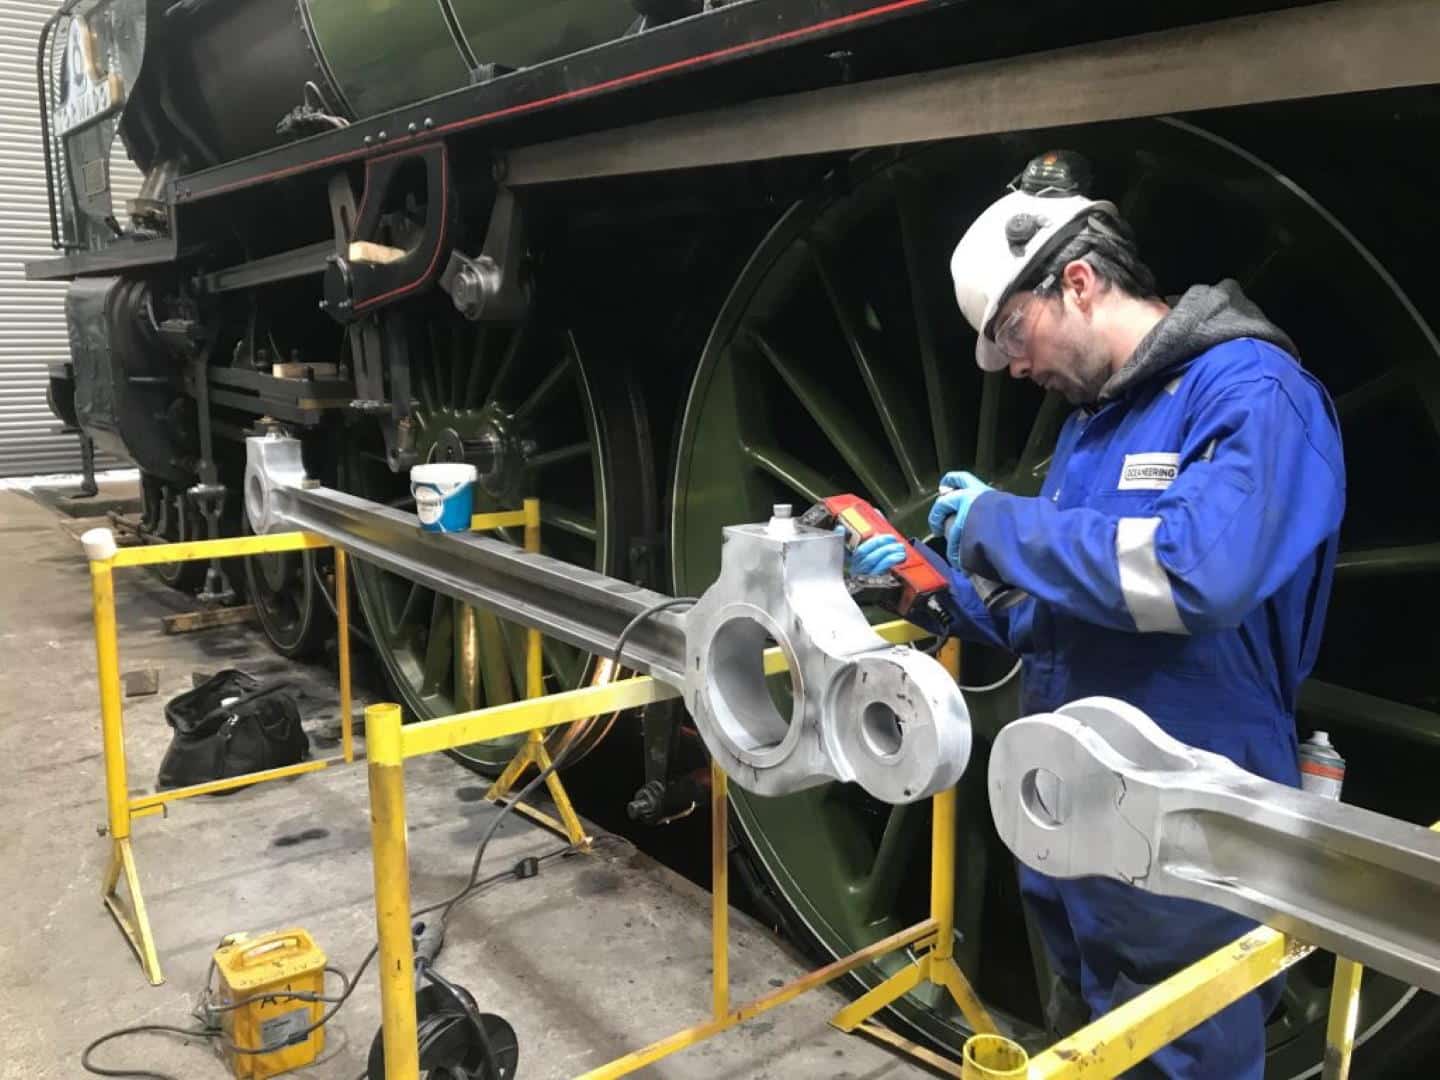 MPI tests on Motion parts // Credit The A1 Steam Locomotive Trust